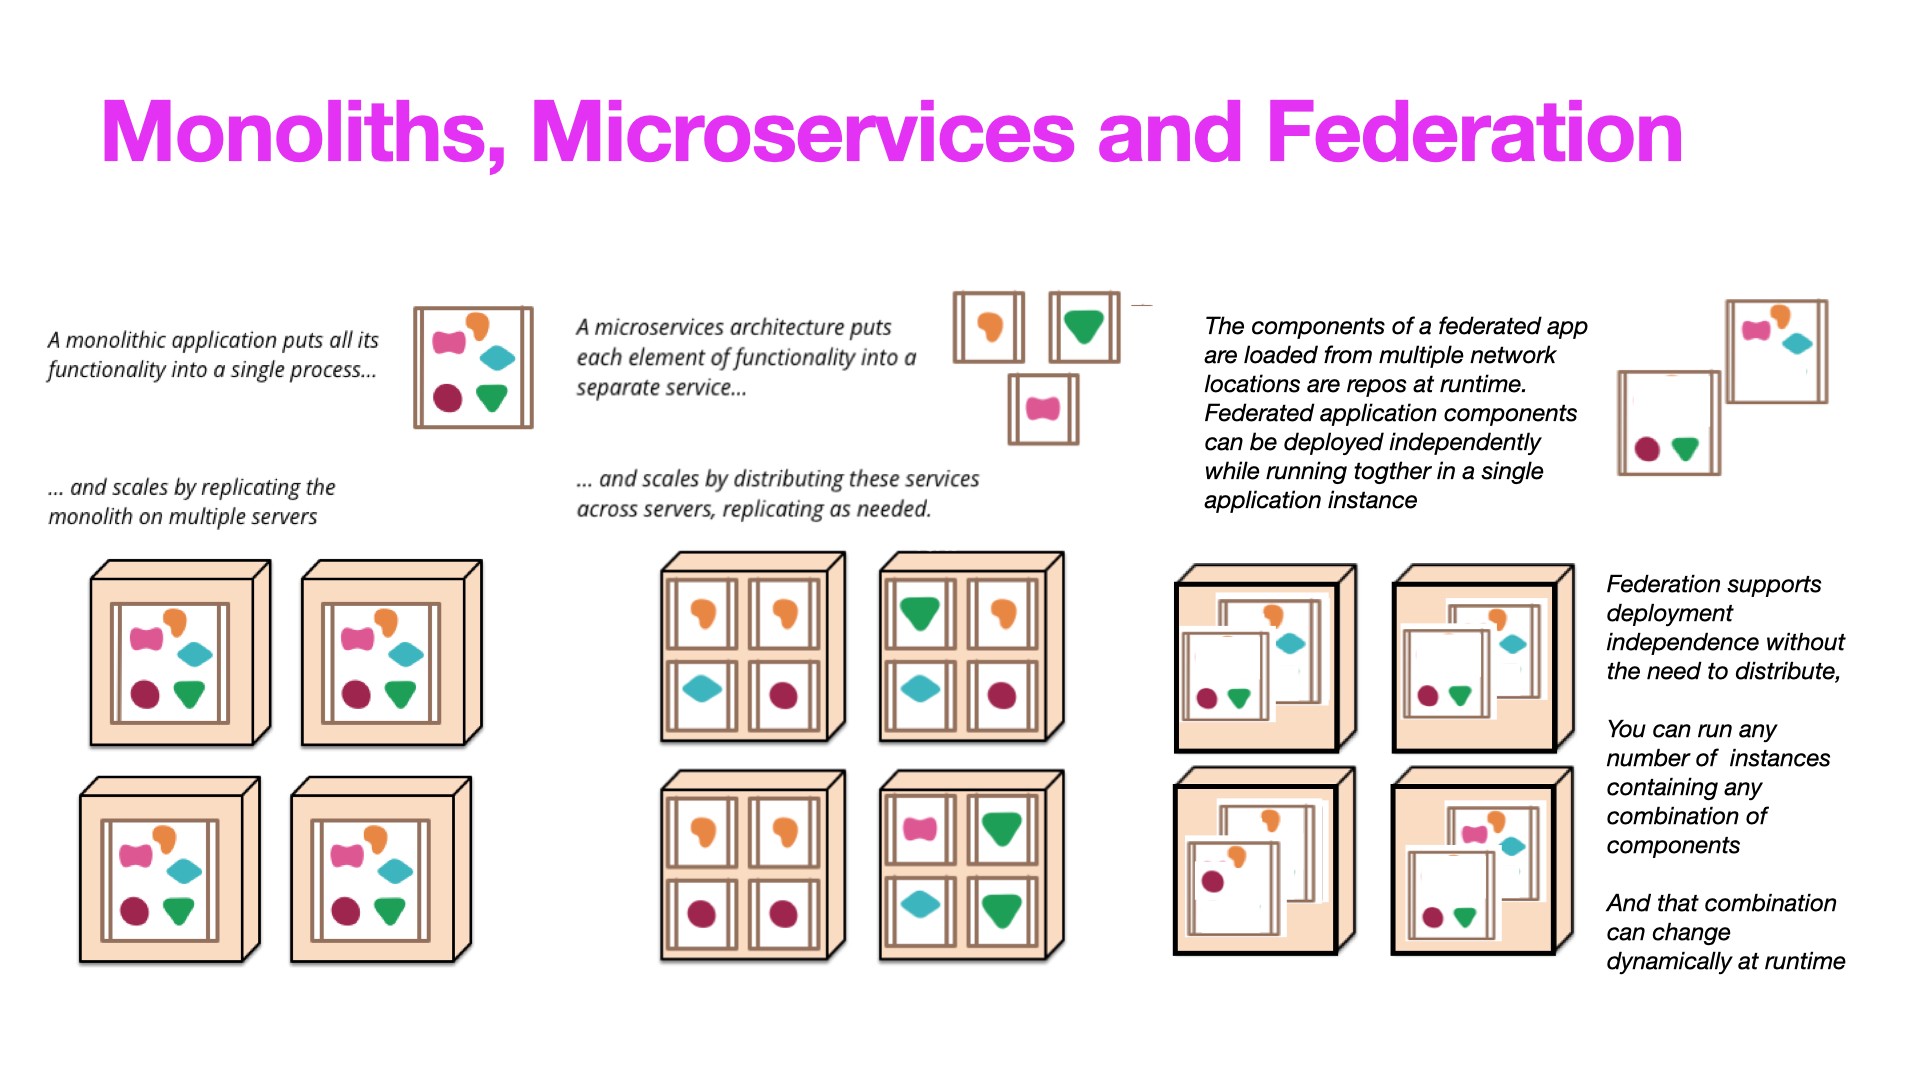 An image taken from martinfowler.com and modified to include federation